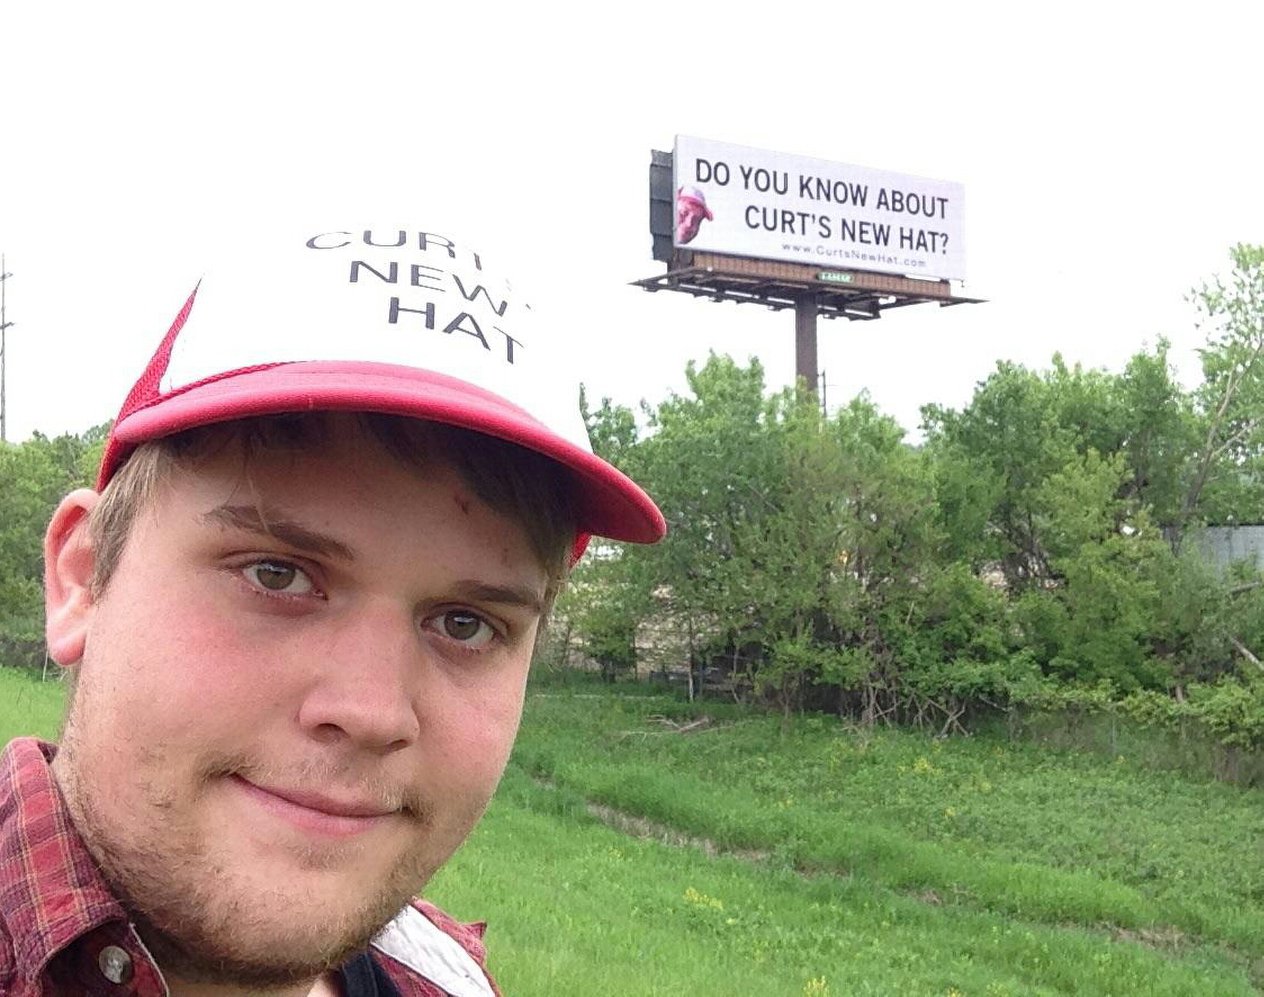 Old schoolmate buys a billboard showing his new hat